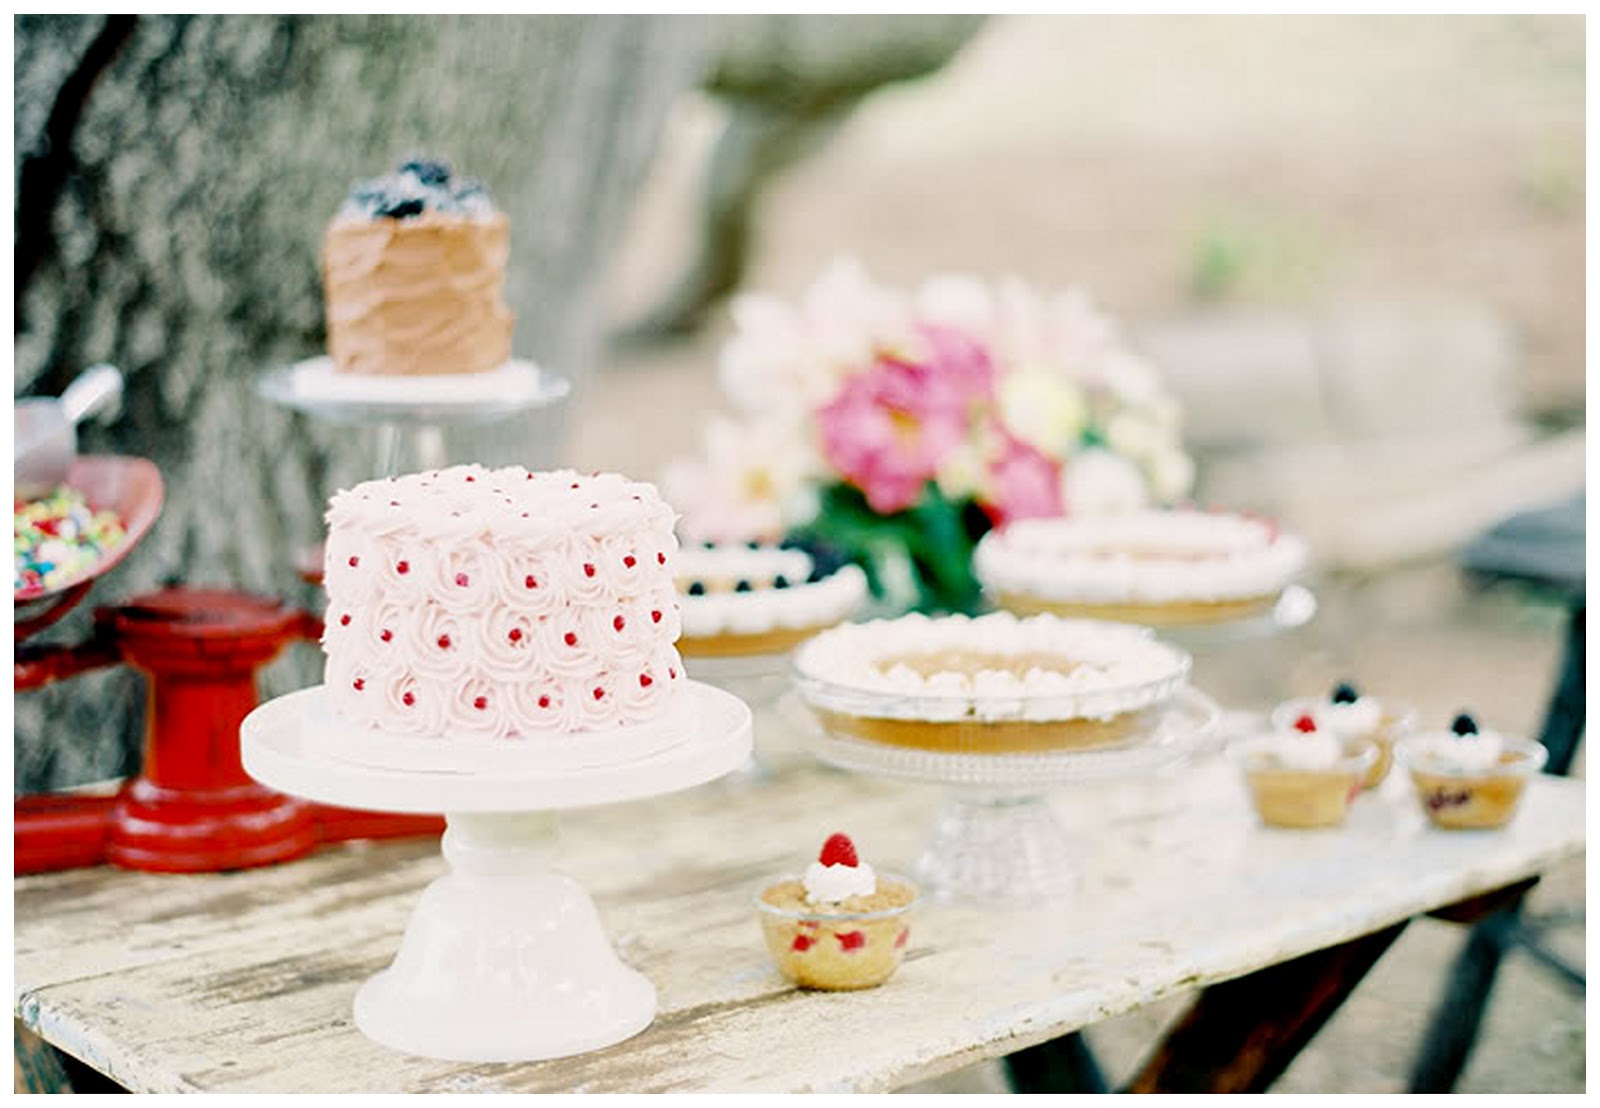 cupcakes and Posies Poppies Events & events and Concepts:  Design vintage Floral lipstick